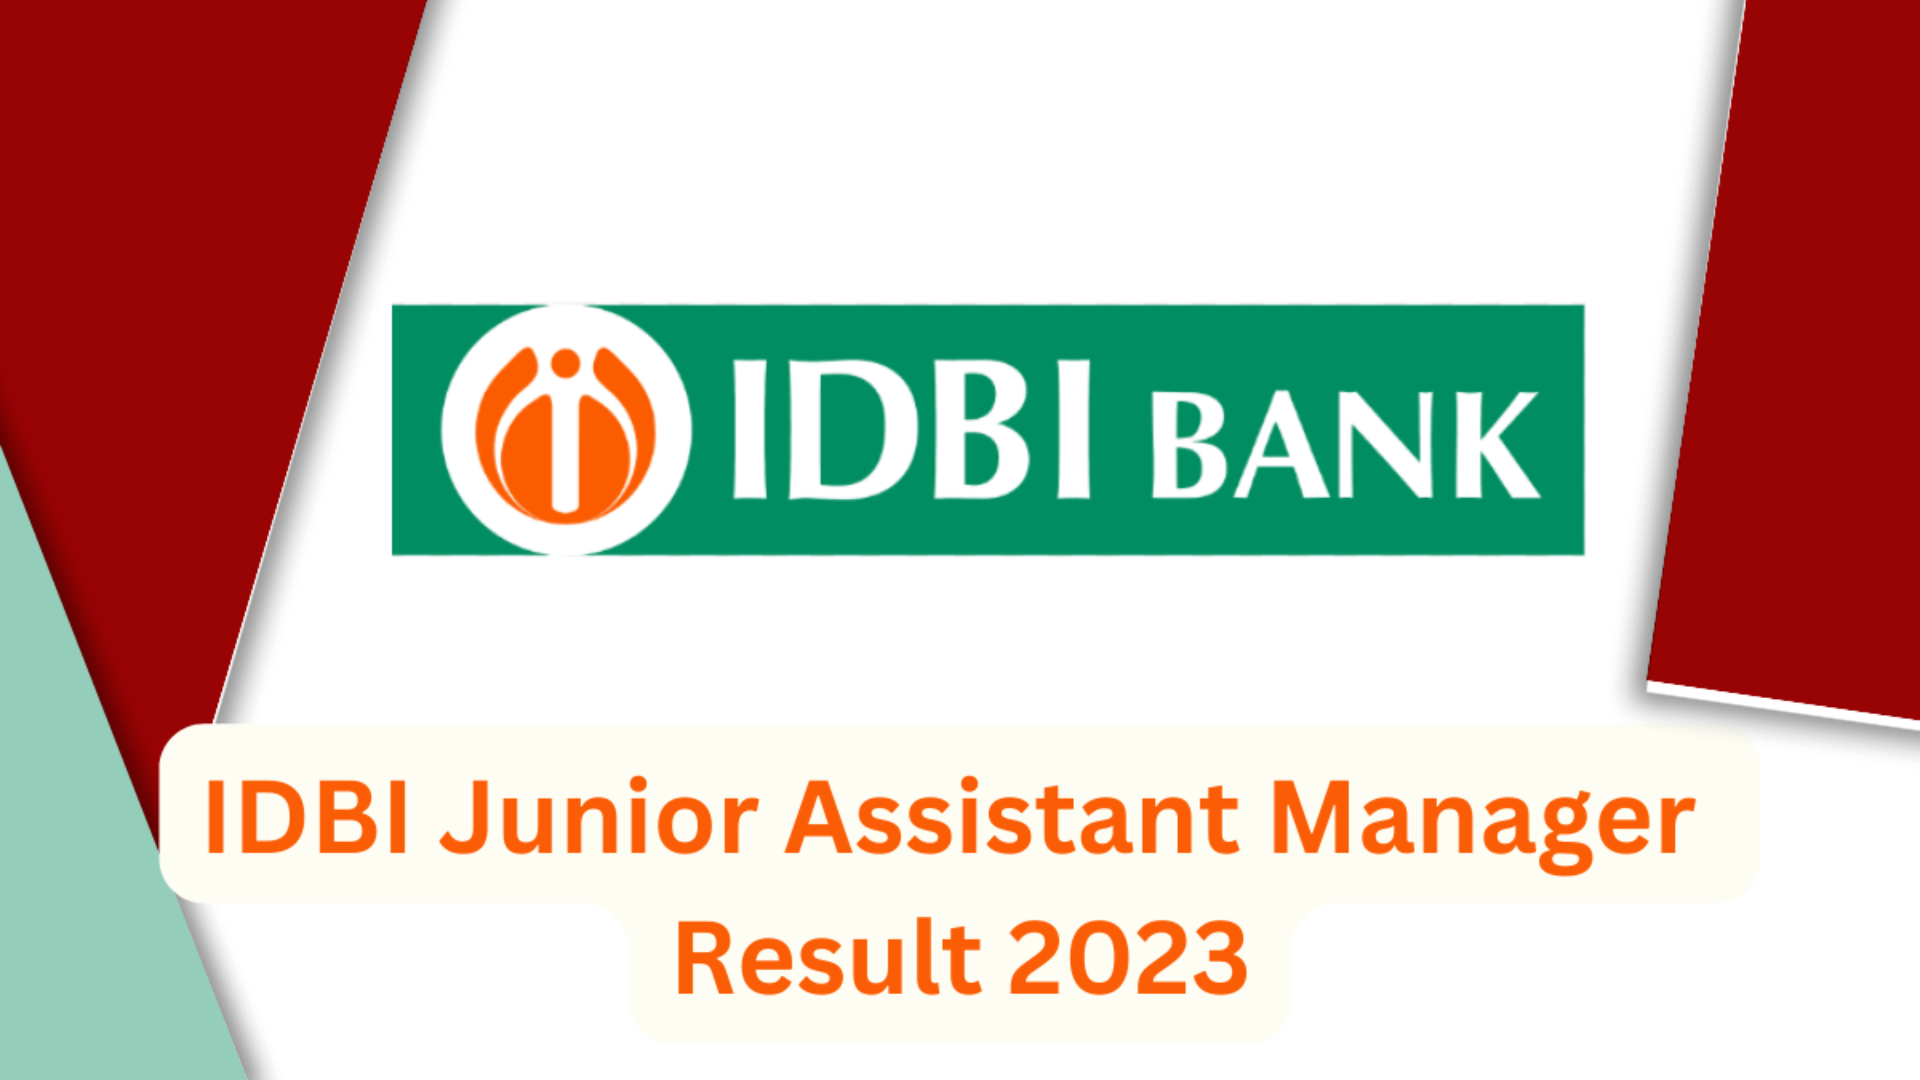 IDBI Bank Junior Assistant Manager Through PGDBF 2023 Result for 600 Post